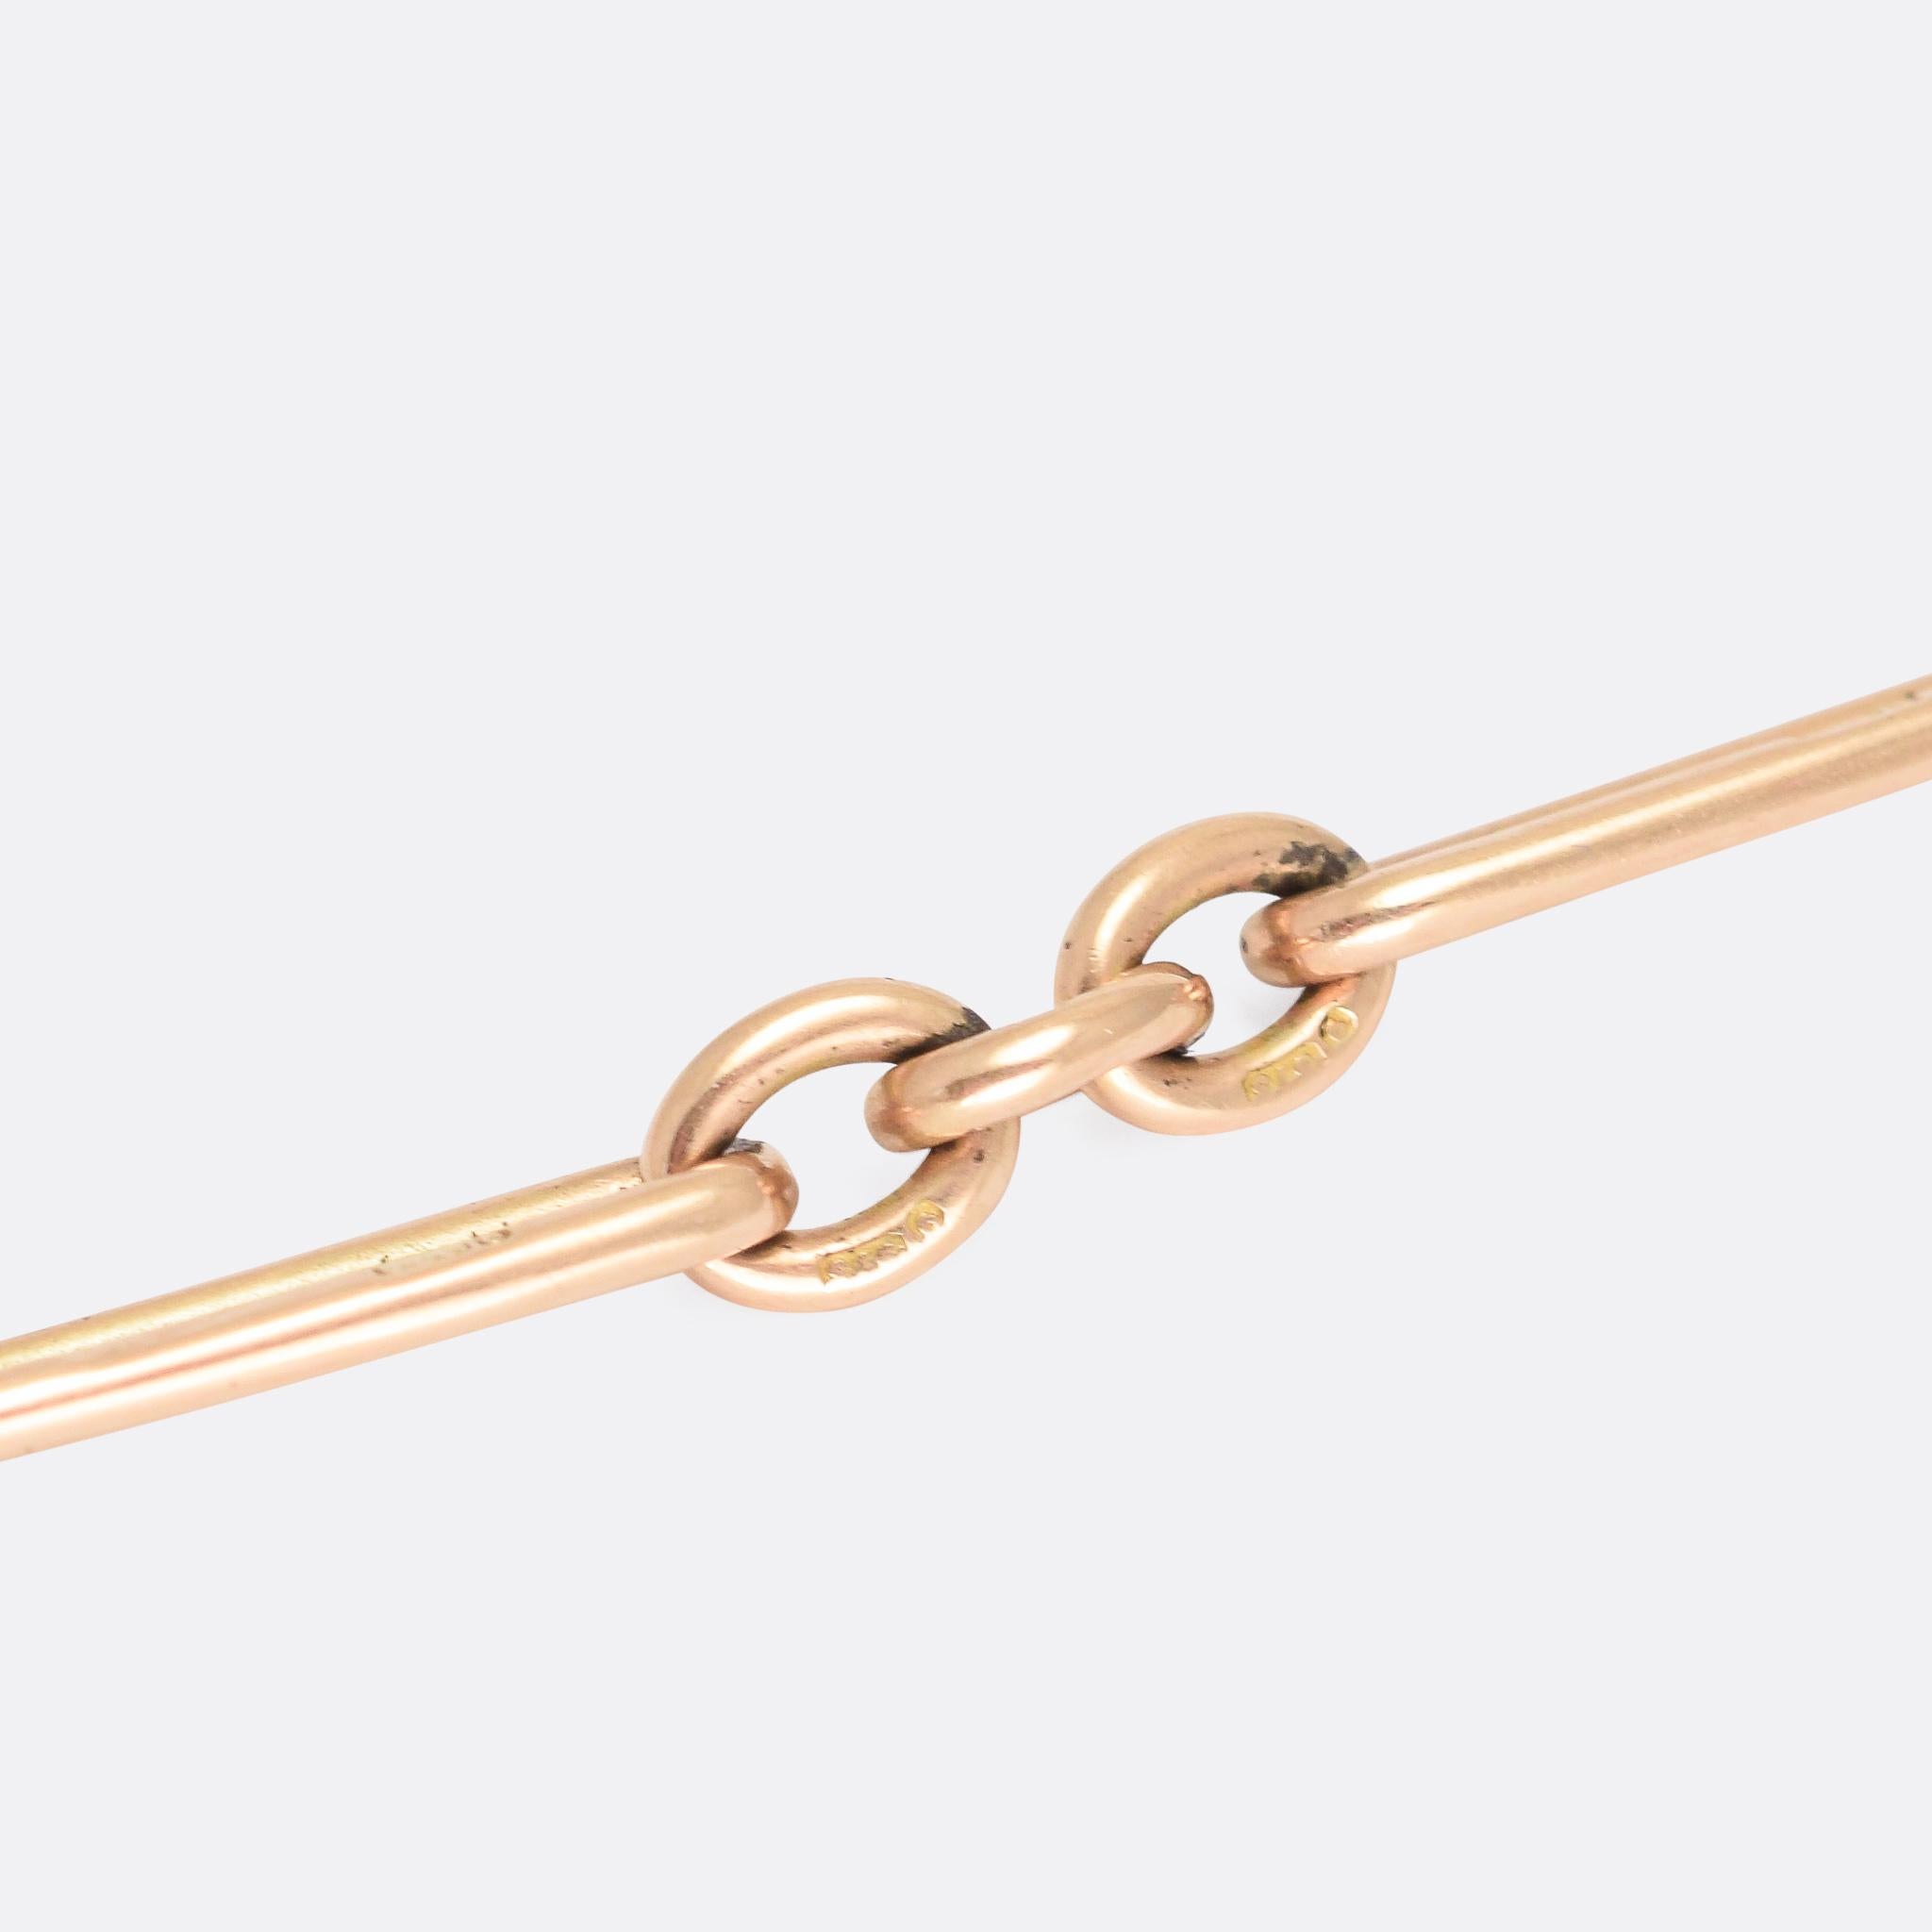 A chunky Victorian trombone link chain in solid 9k rose gold. It dates from the late 19th Century, circa 1880, and it's long enough to wear as a short necklace, or doubled up as a bracelet. With both ring bolt and swivel fastener, and an articulated